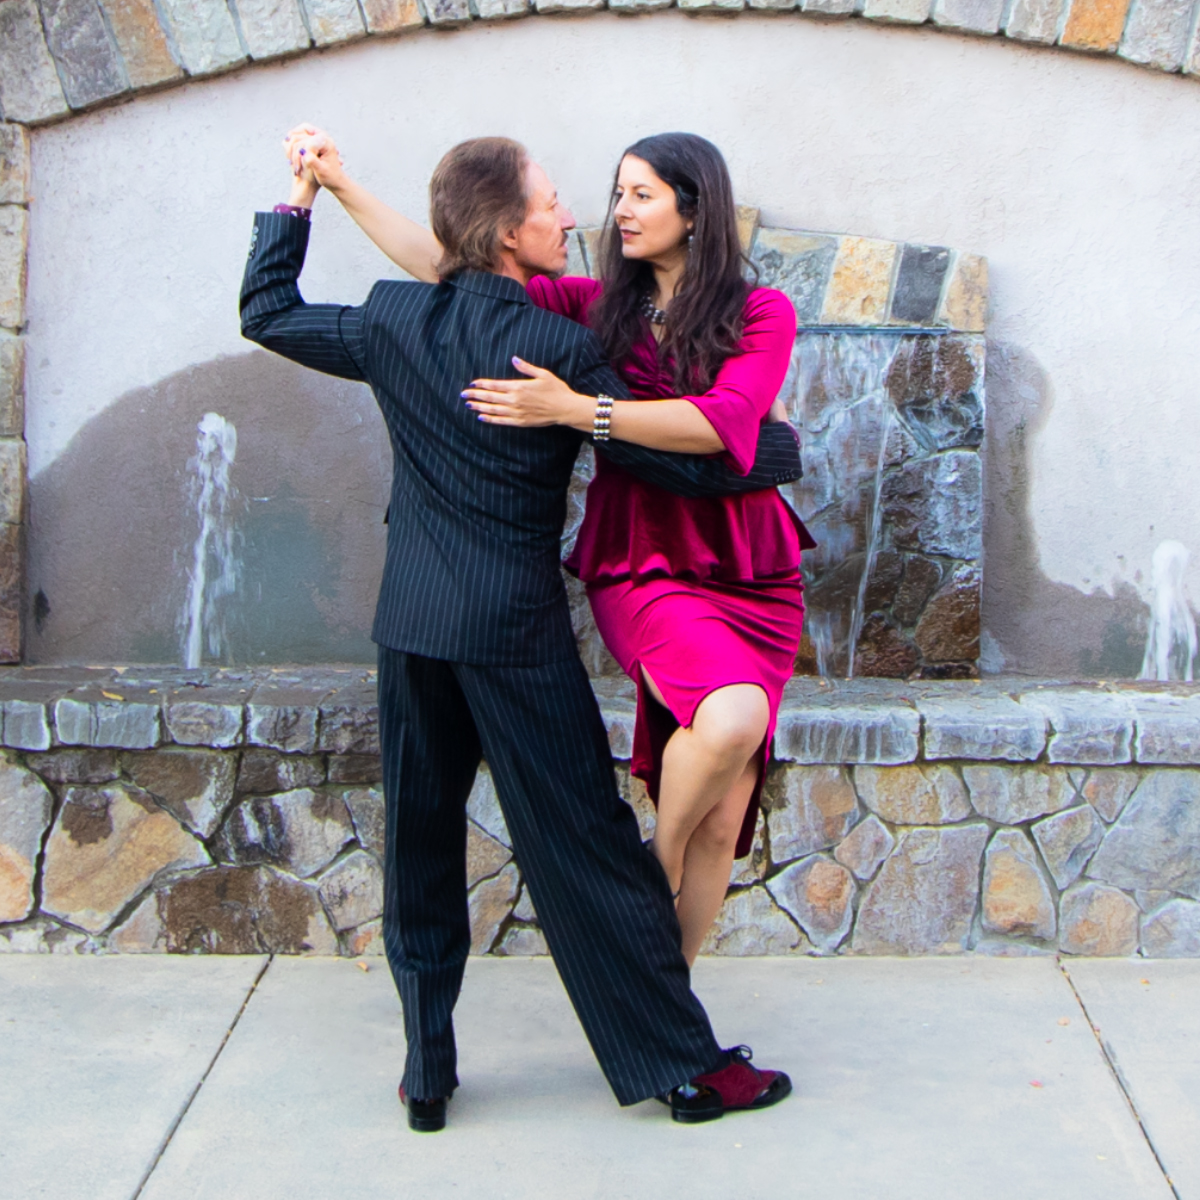 From Posture to Pivot: A Journey to Excellence in Argentine Tango Dancing